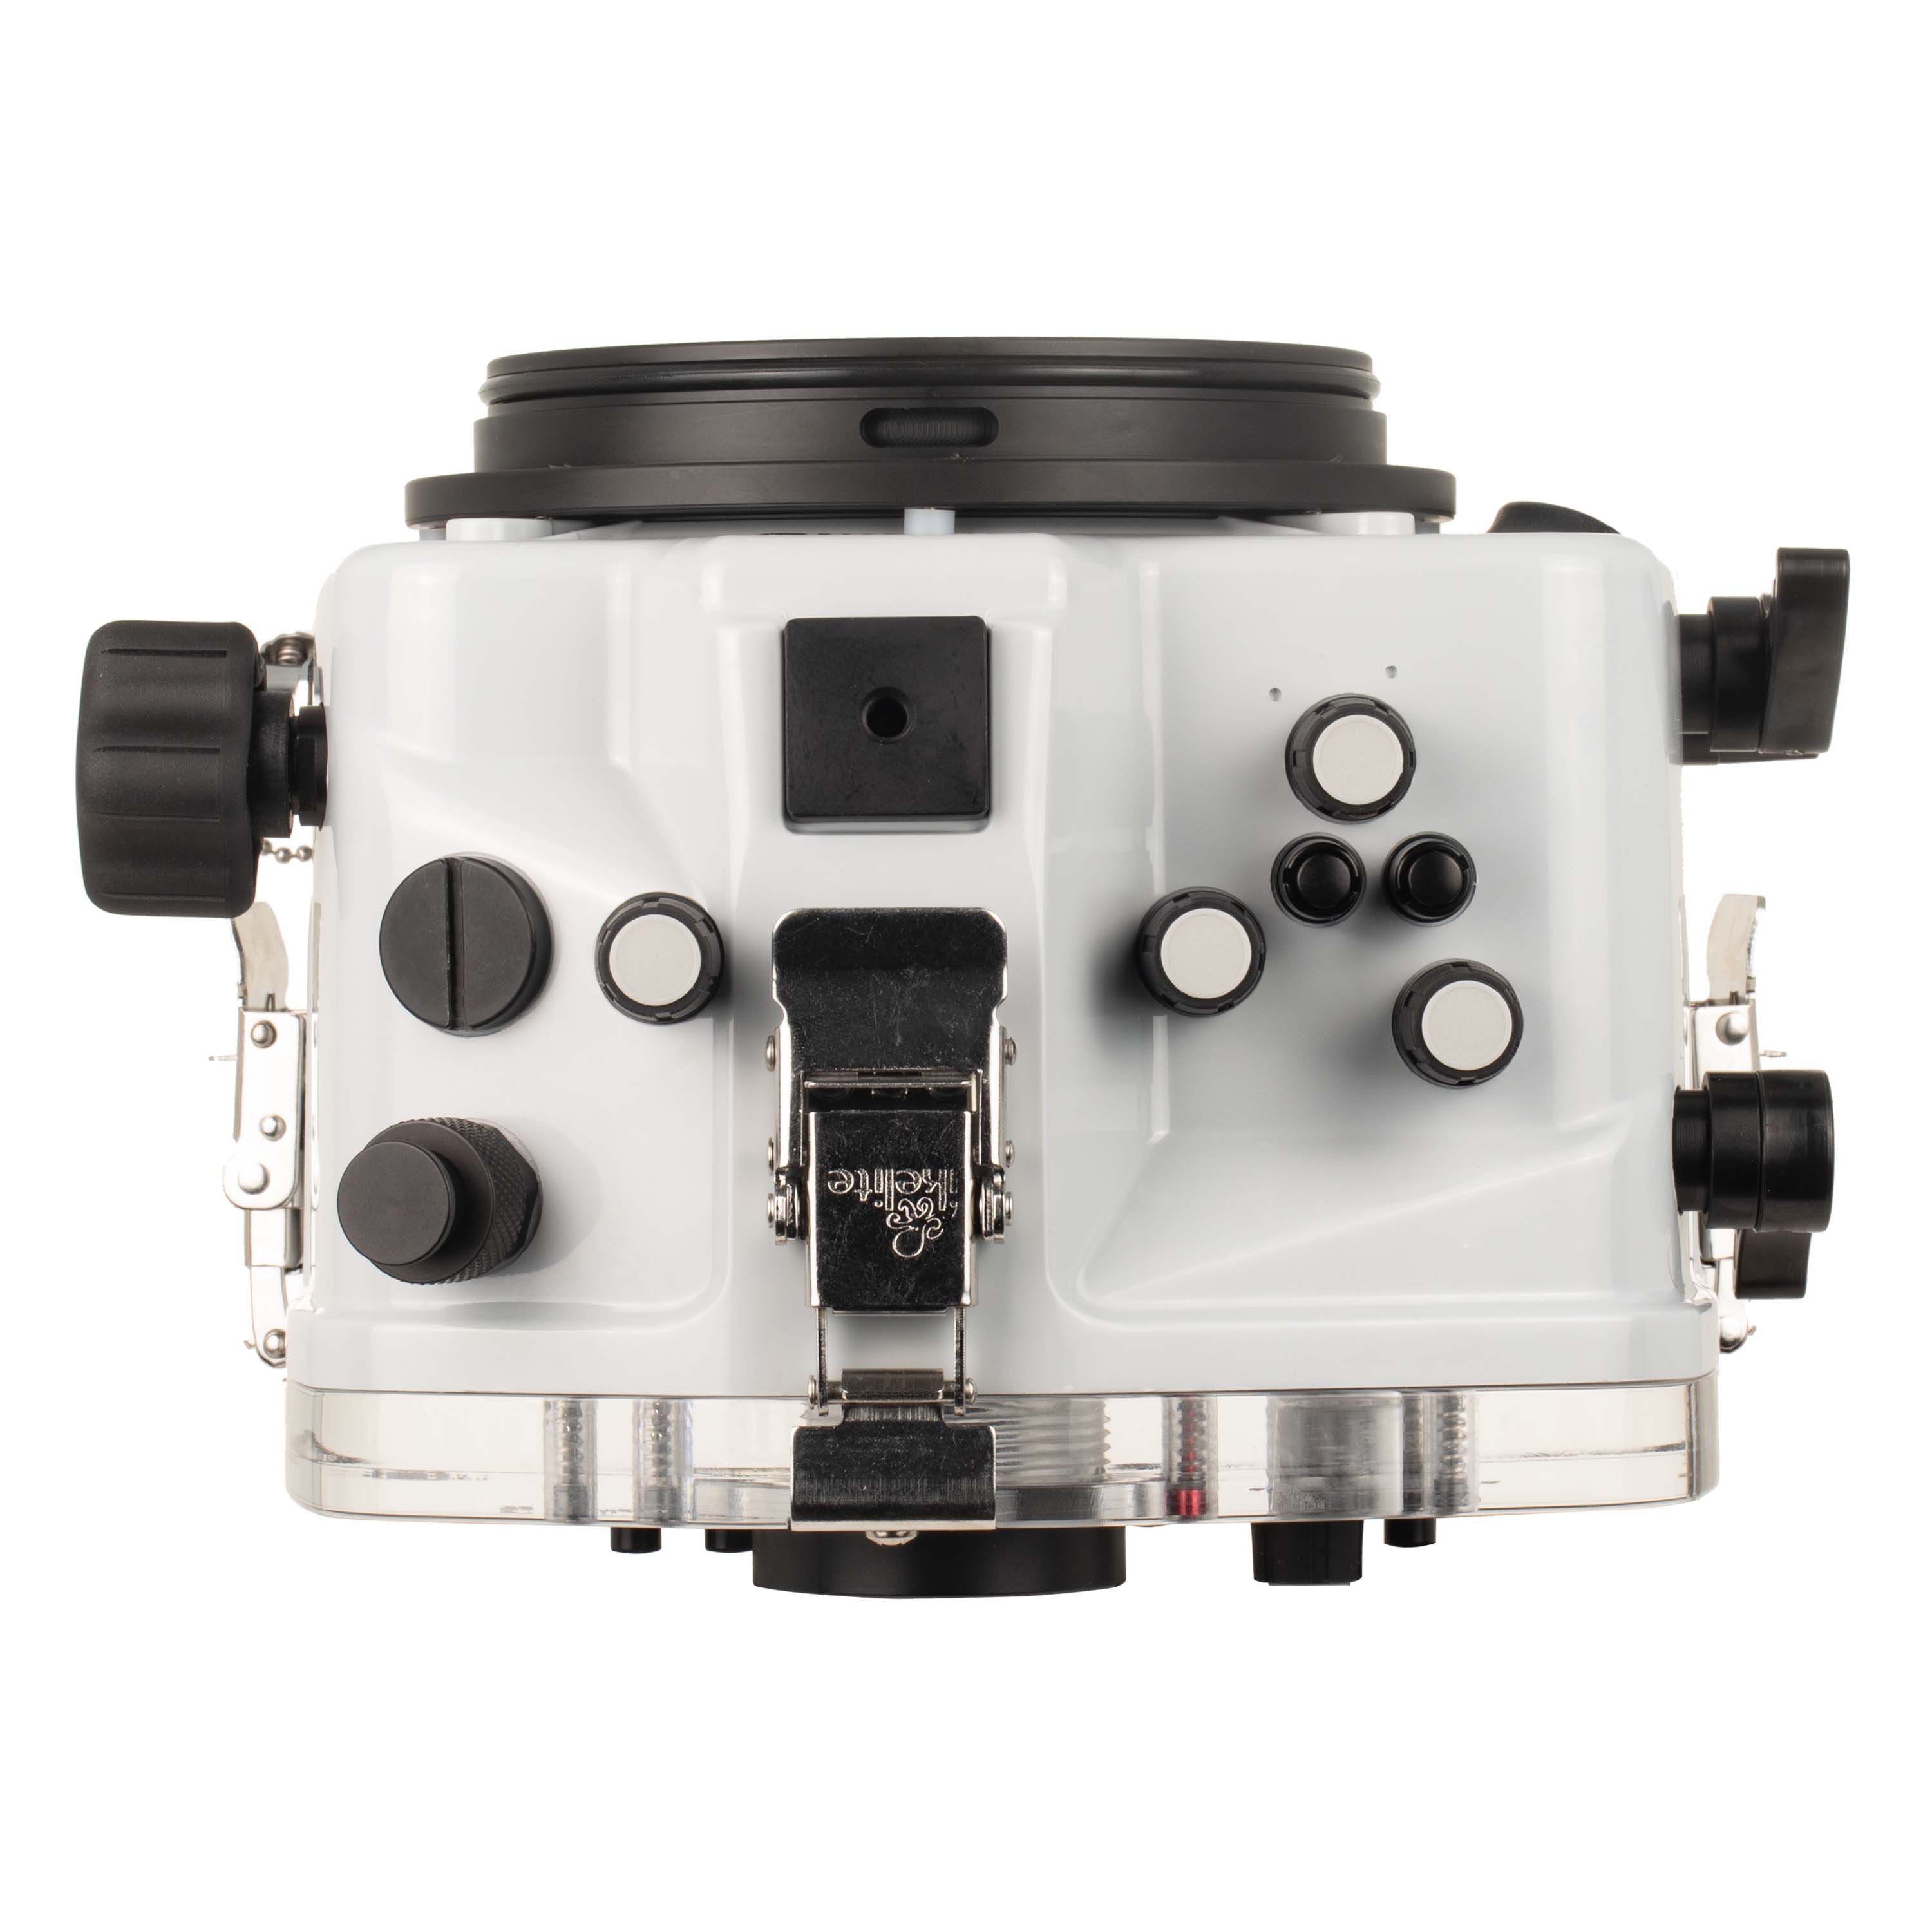 Ikelite 200DL Underwater Housing for Sony Alpha A7 III, A7R III, A9 Mirrorless Cameras